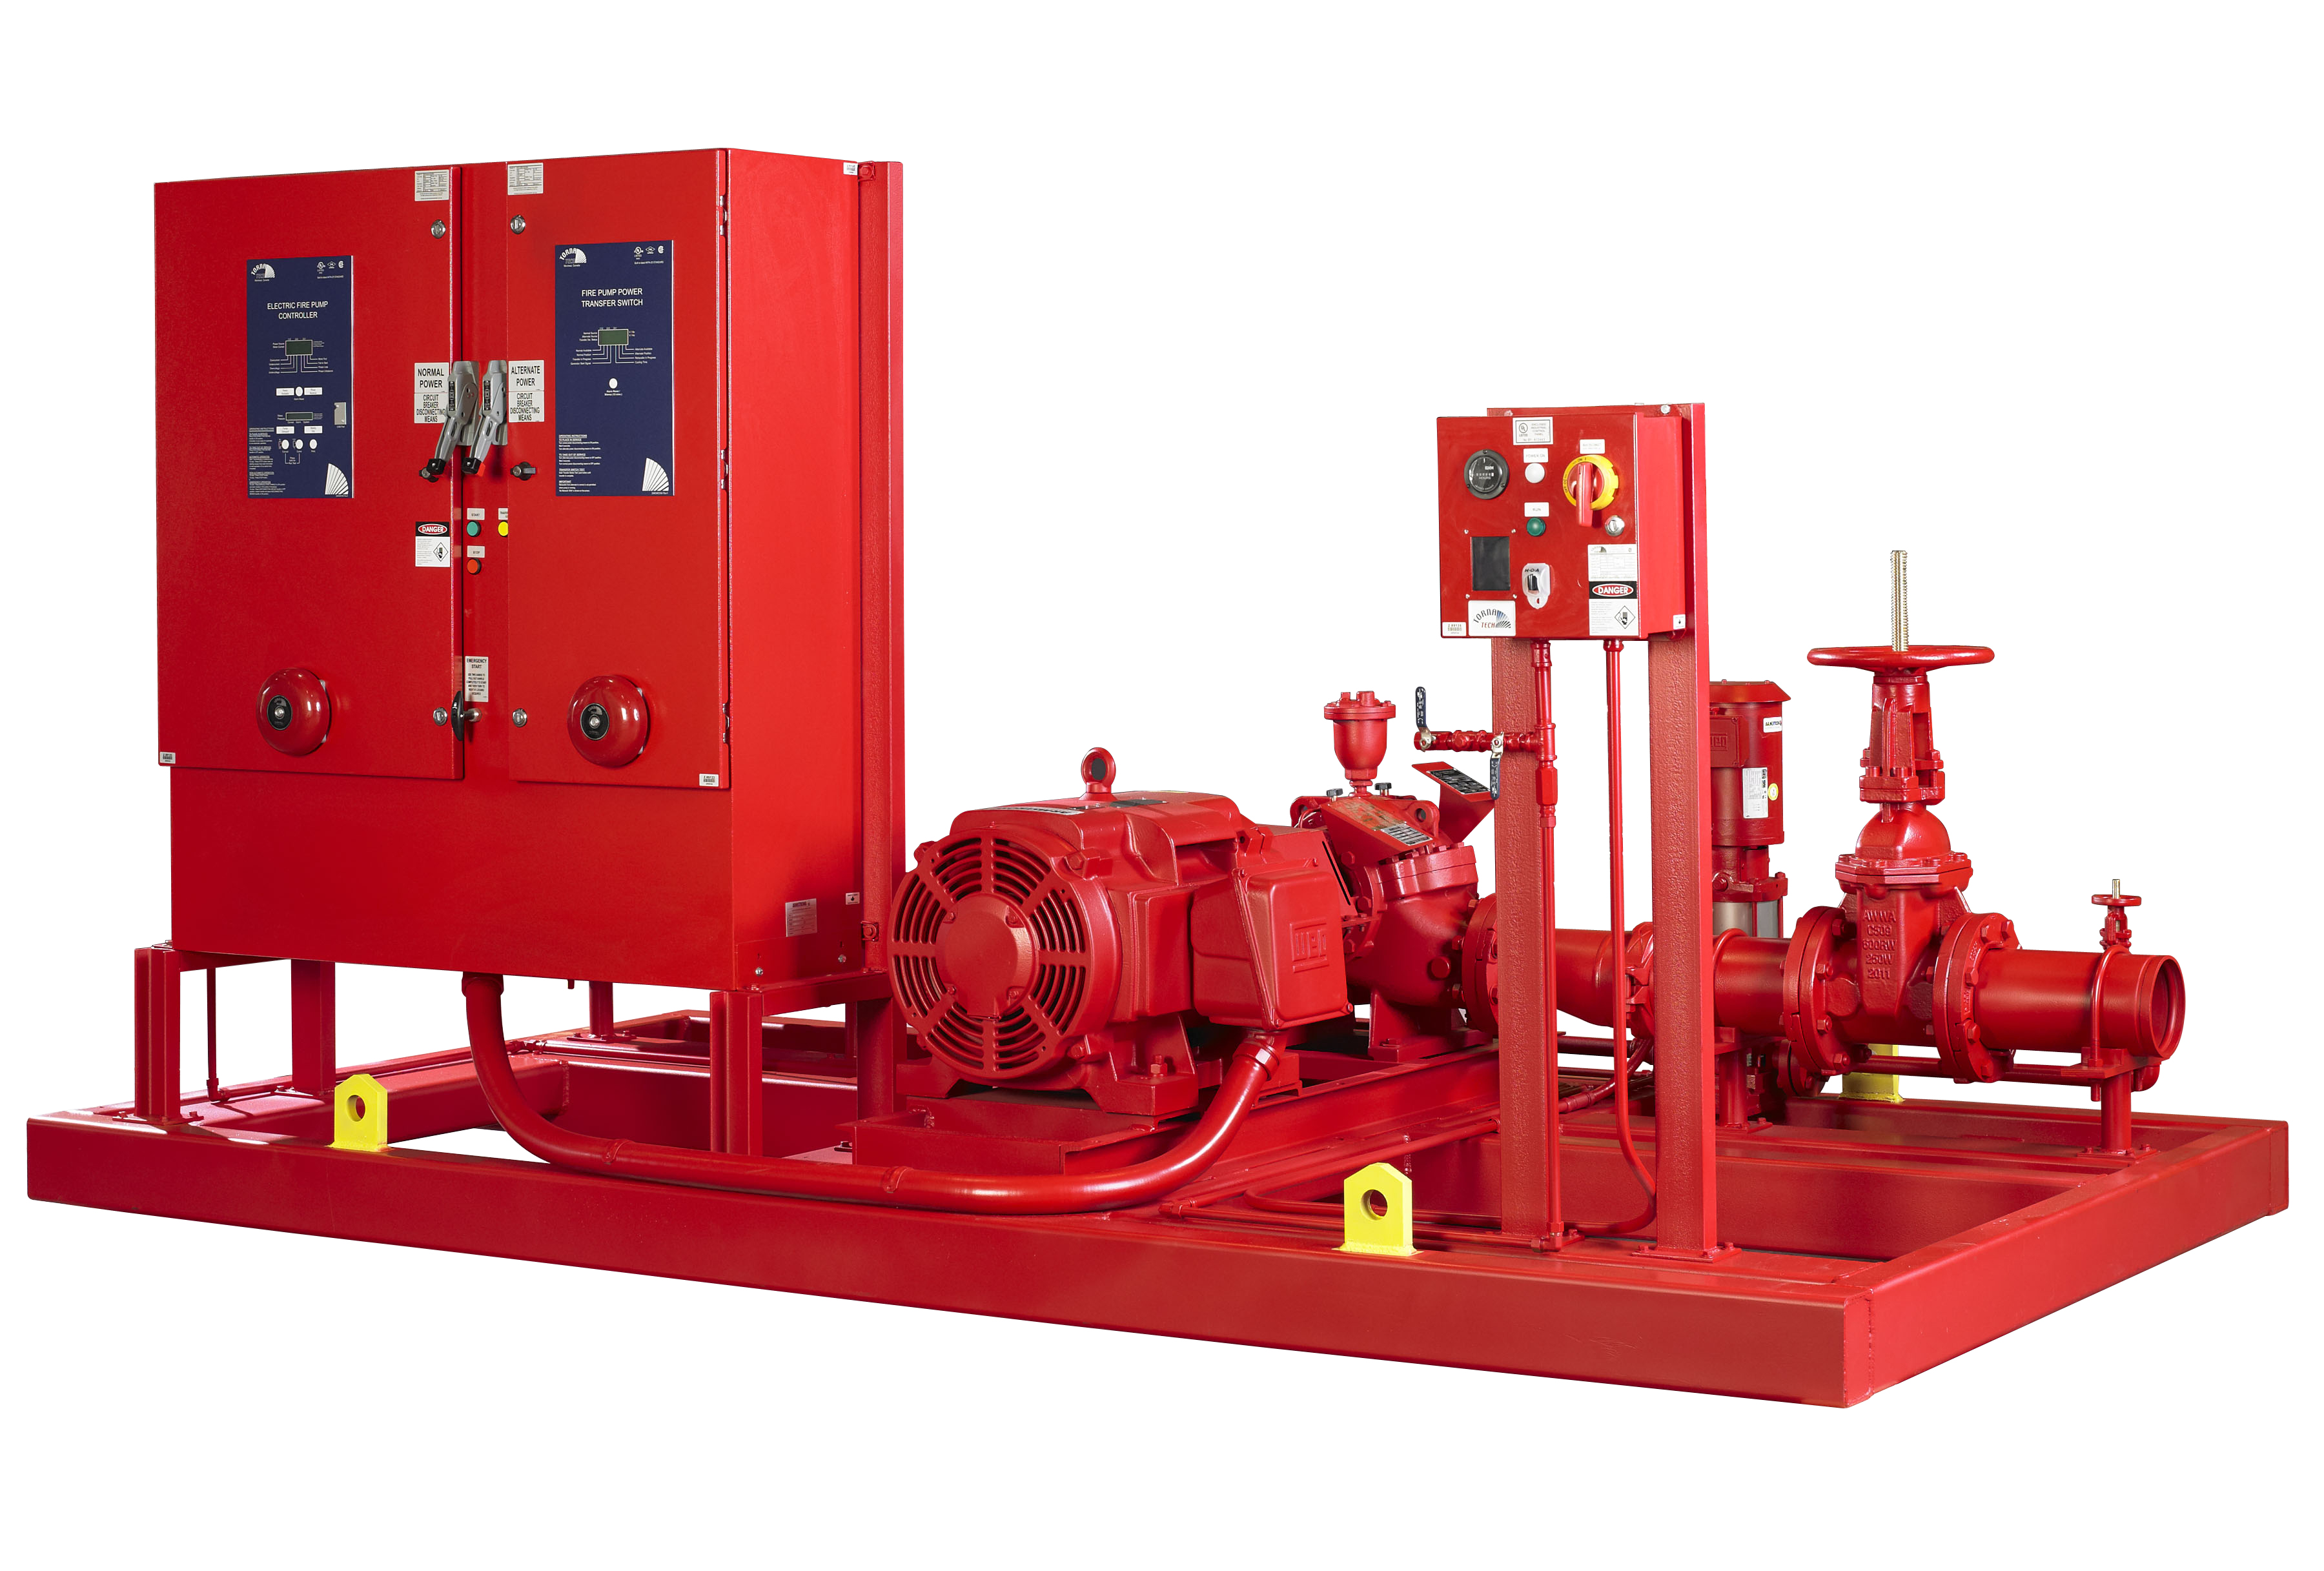 Armstrong HSC Firepak -- a completely integrated fire pump solution | The McMorrow Reports